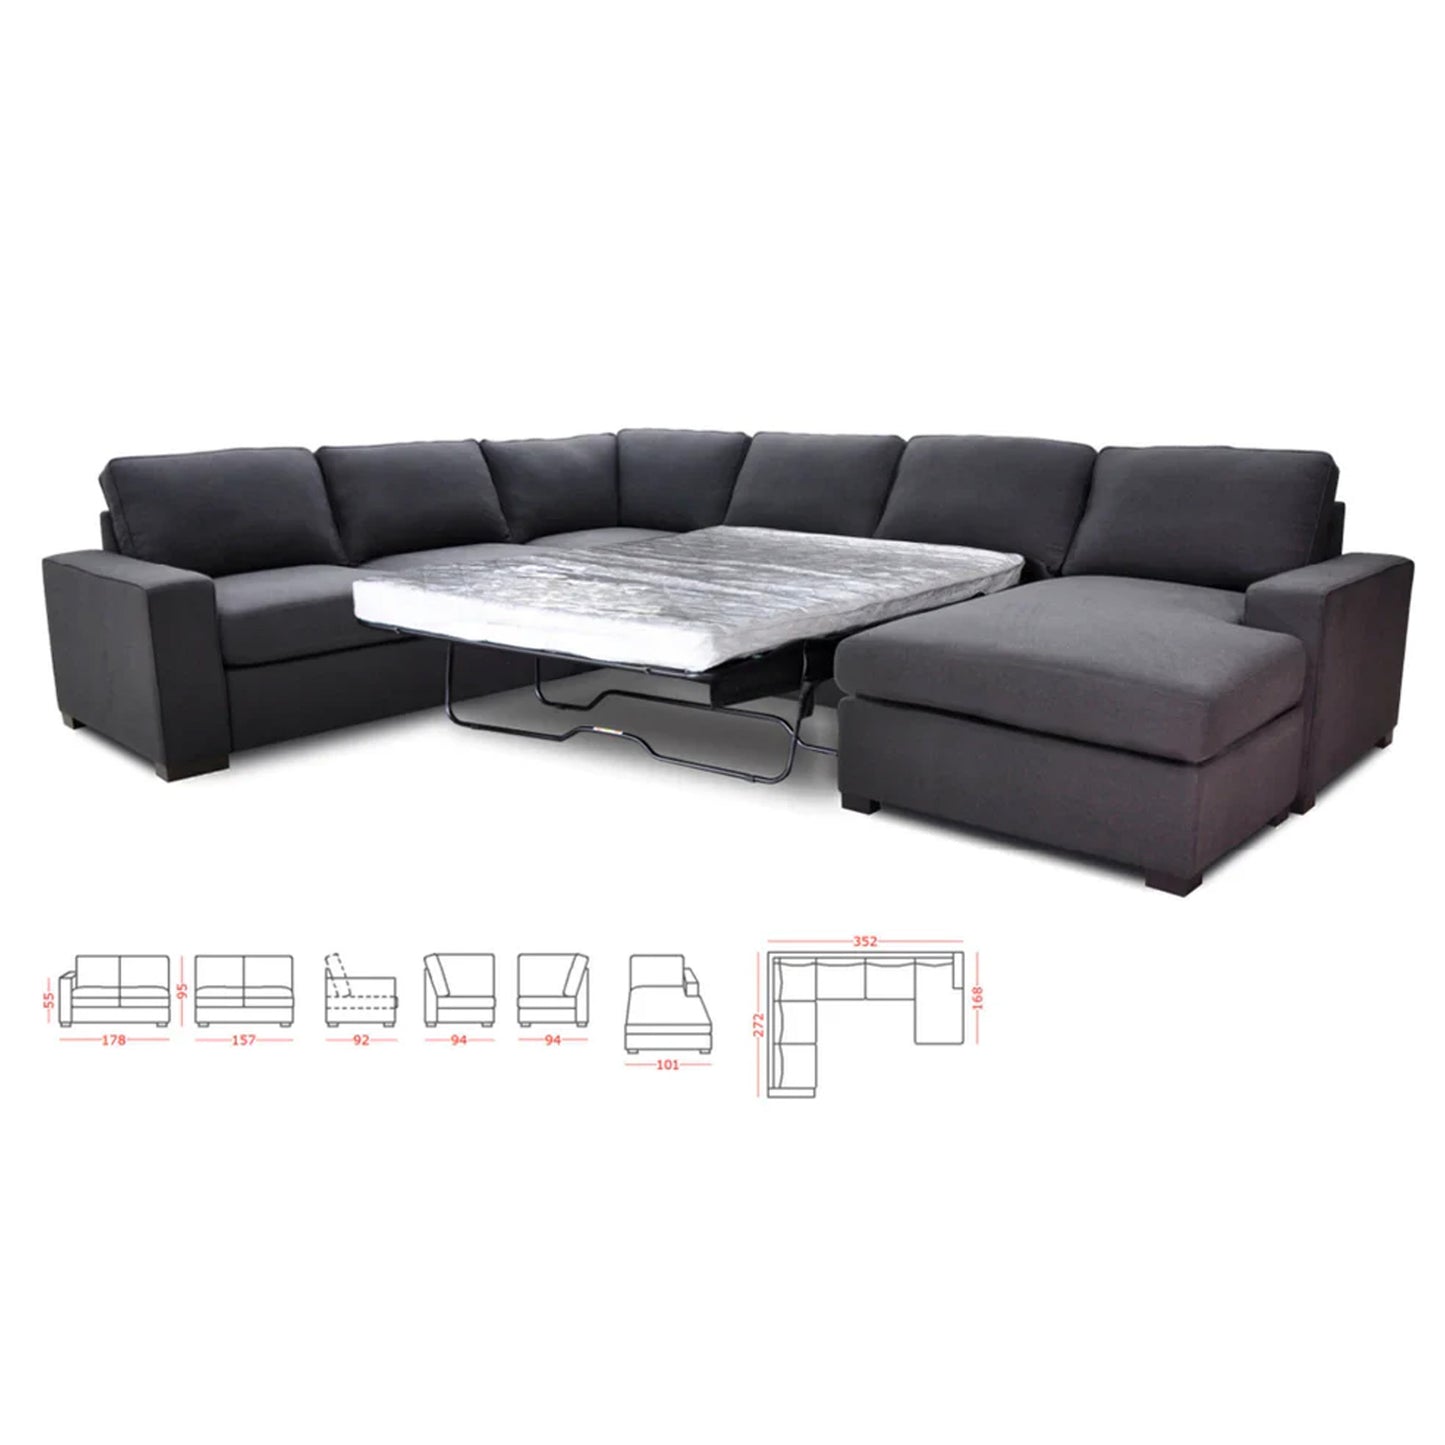 Barcelona Corner Lounge Suite with Sofa Bed